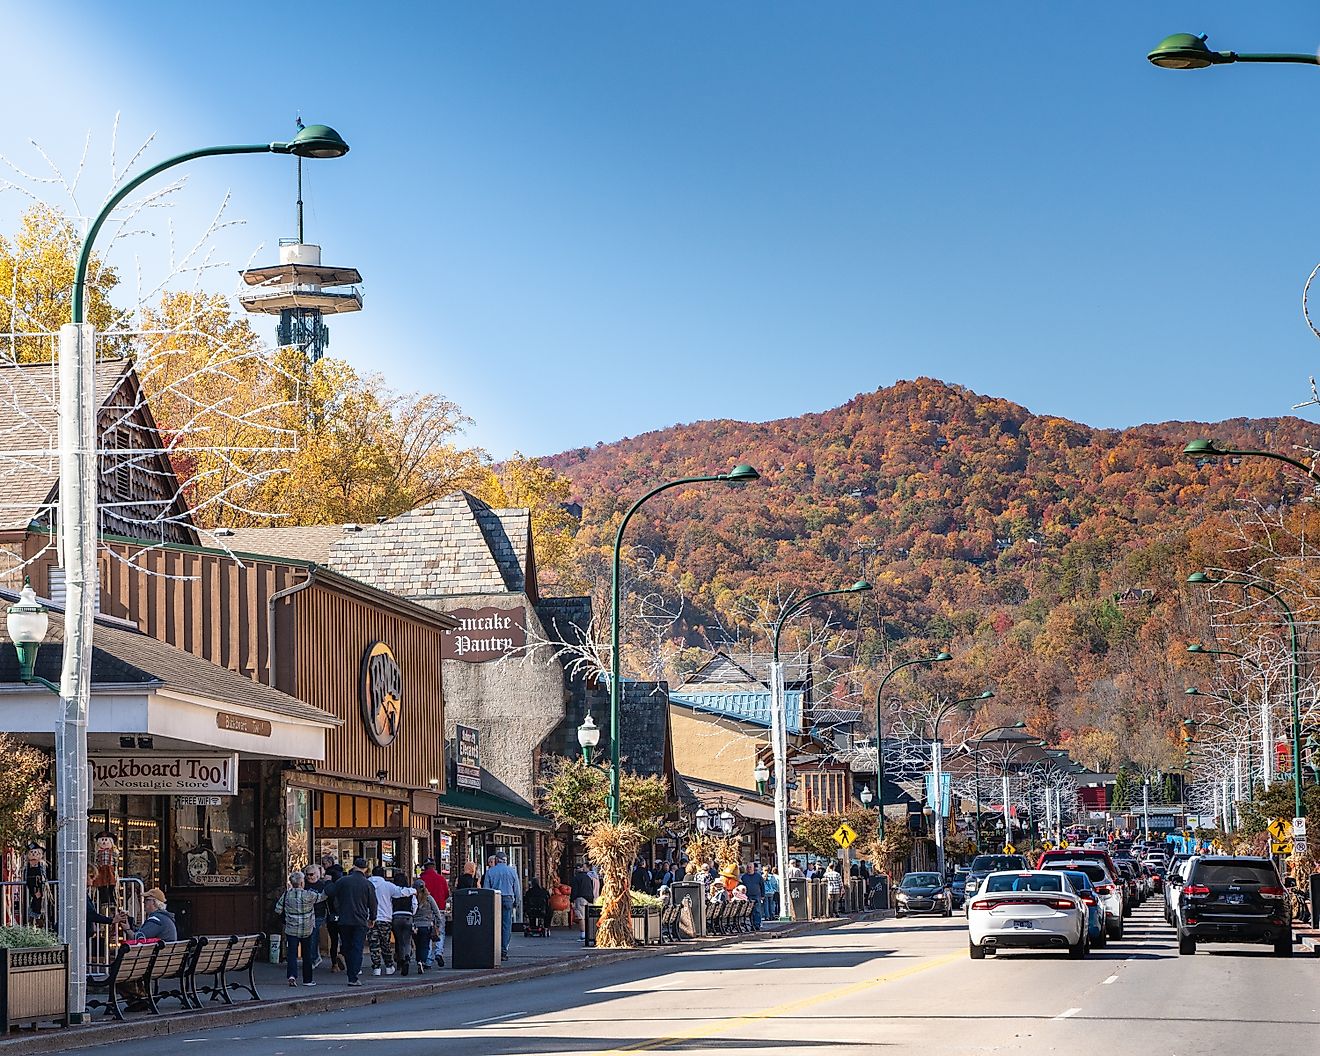 Street view of popular tourist city Gatlinburg, Tennessee, in the Smoky Mountains, with attractions in view. Editorial credit: Little Vignettes Photo / Shutterstock.com